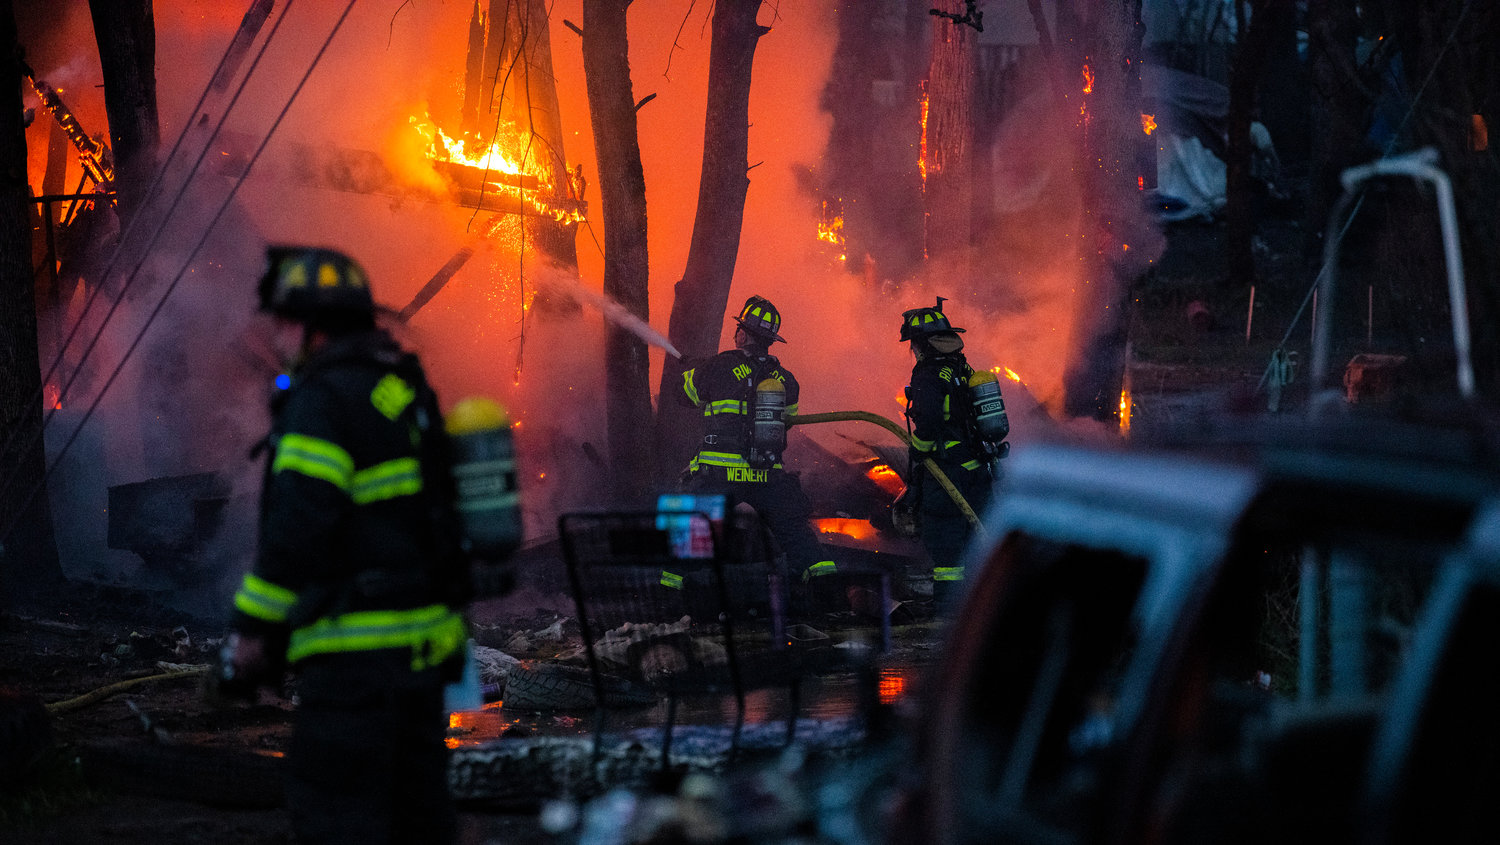 Firefighters battle flames at the end of Eckerson Road in Centralia near Blakeslee Junction as smoke and heat billows from a structure inside a homeless encampment Tuesday, March 28, 2023.